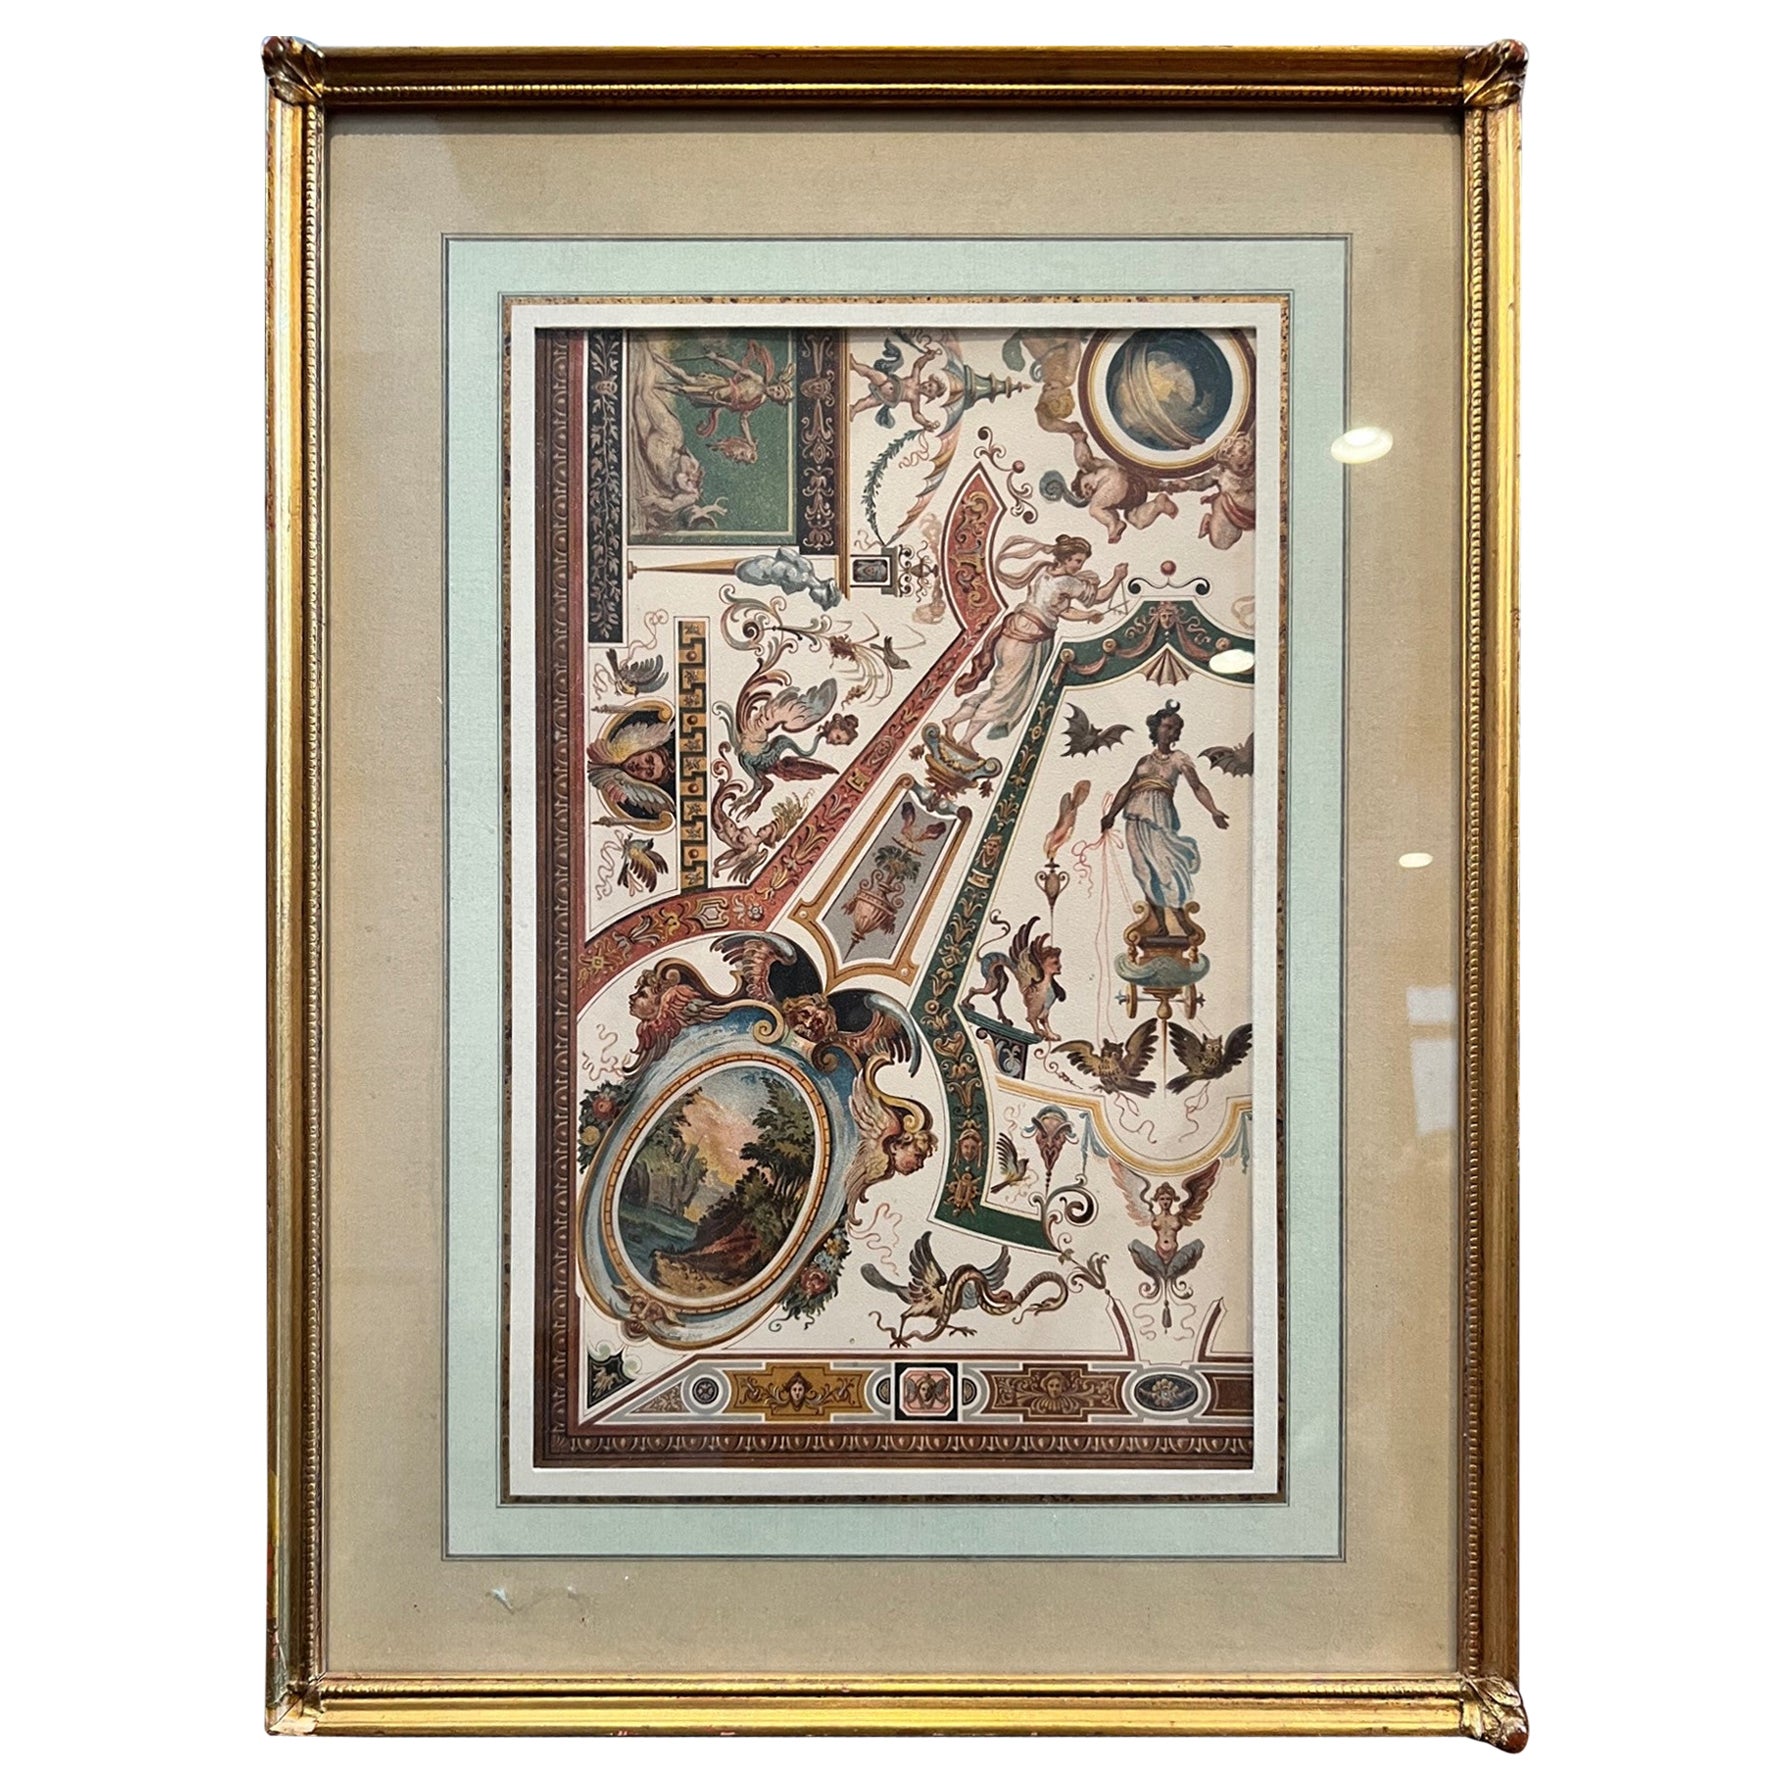 Framed Antique Chromolithograph - Uffizi Gallery Ceiling, Florence, Italy For Sale